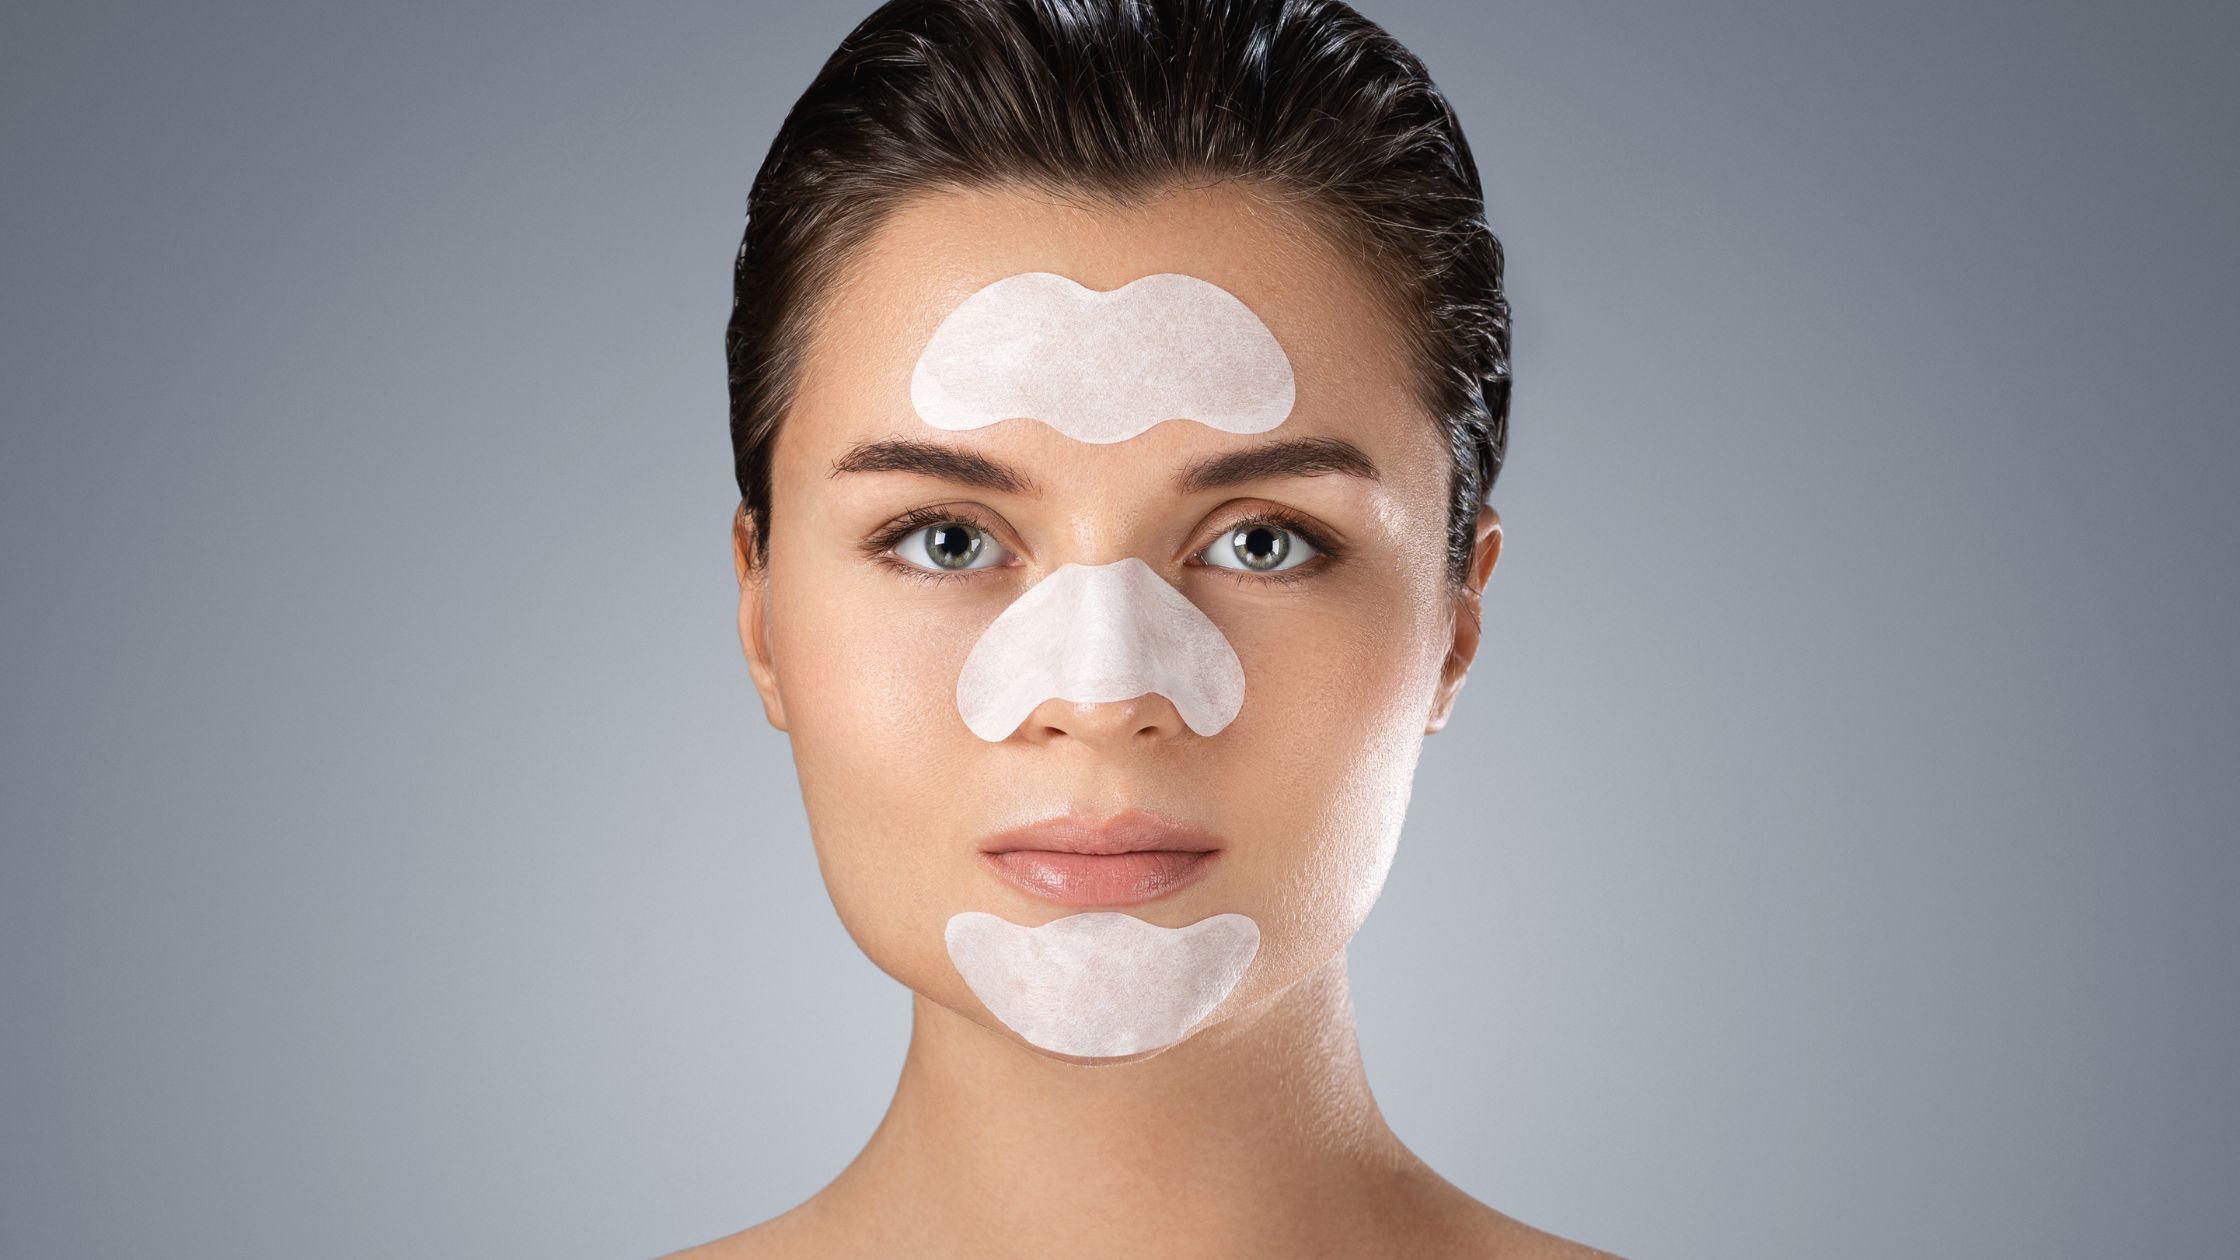 Pore Strips is one of the traditional remedies to cure blackheads